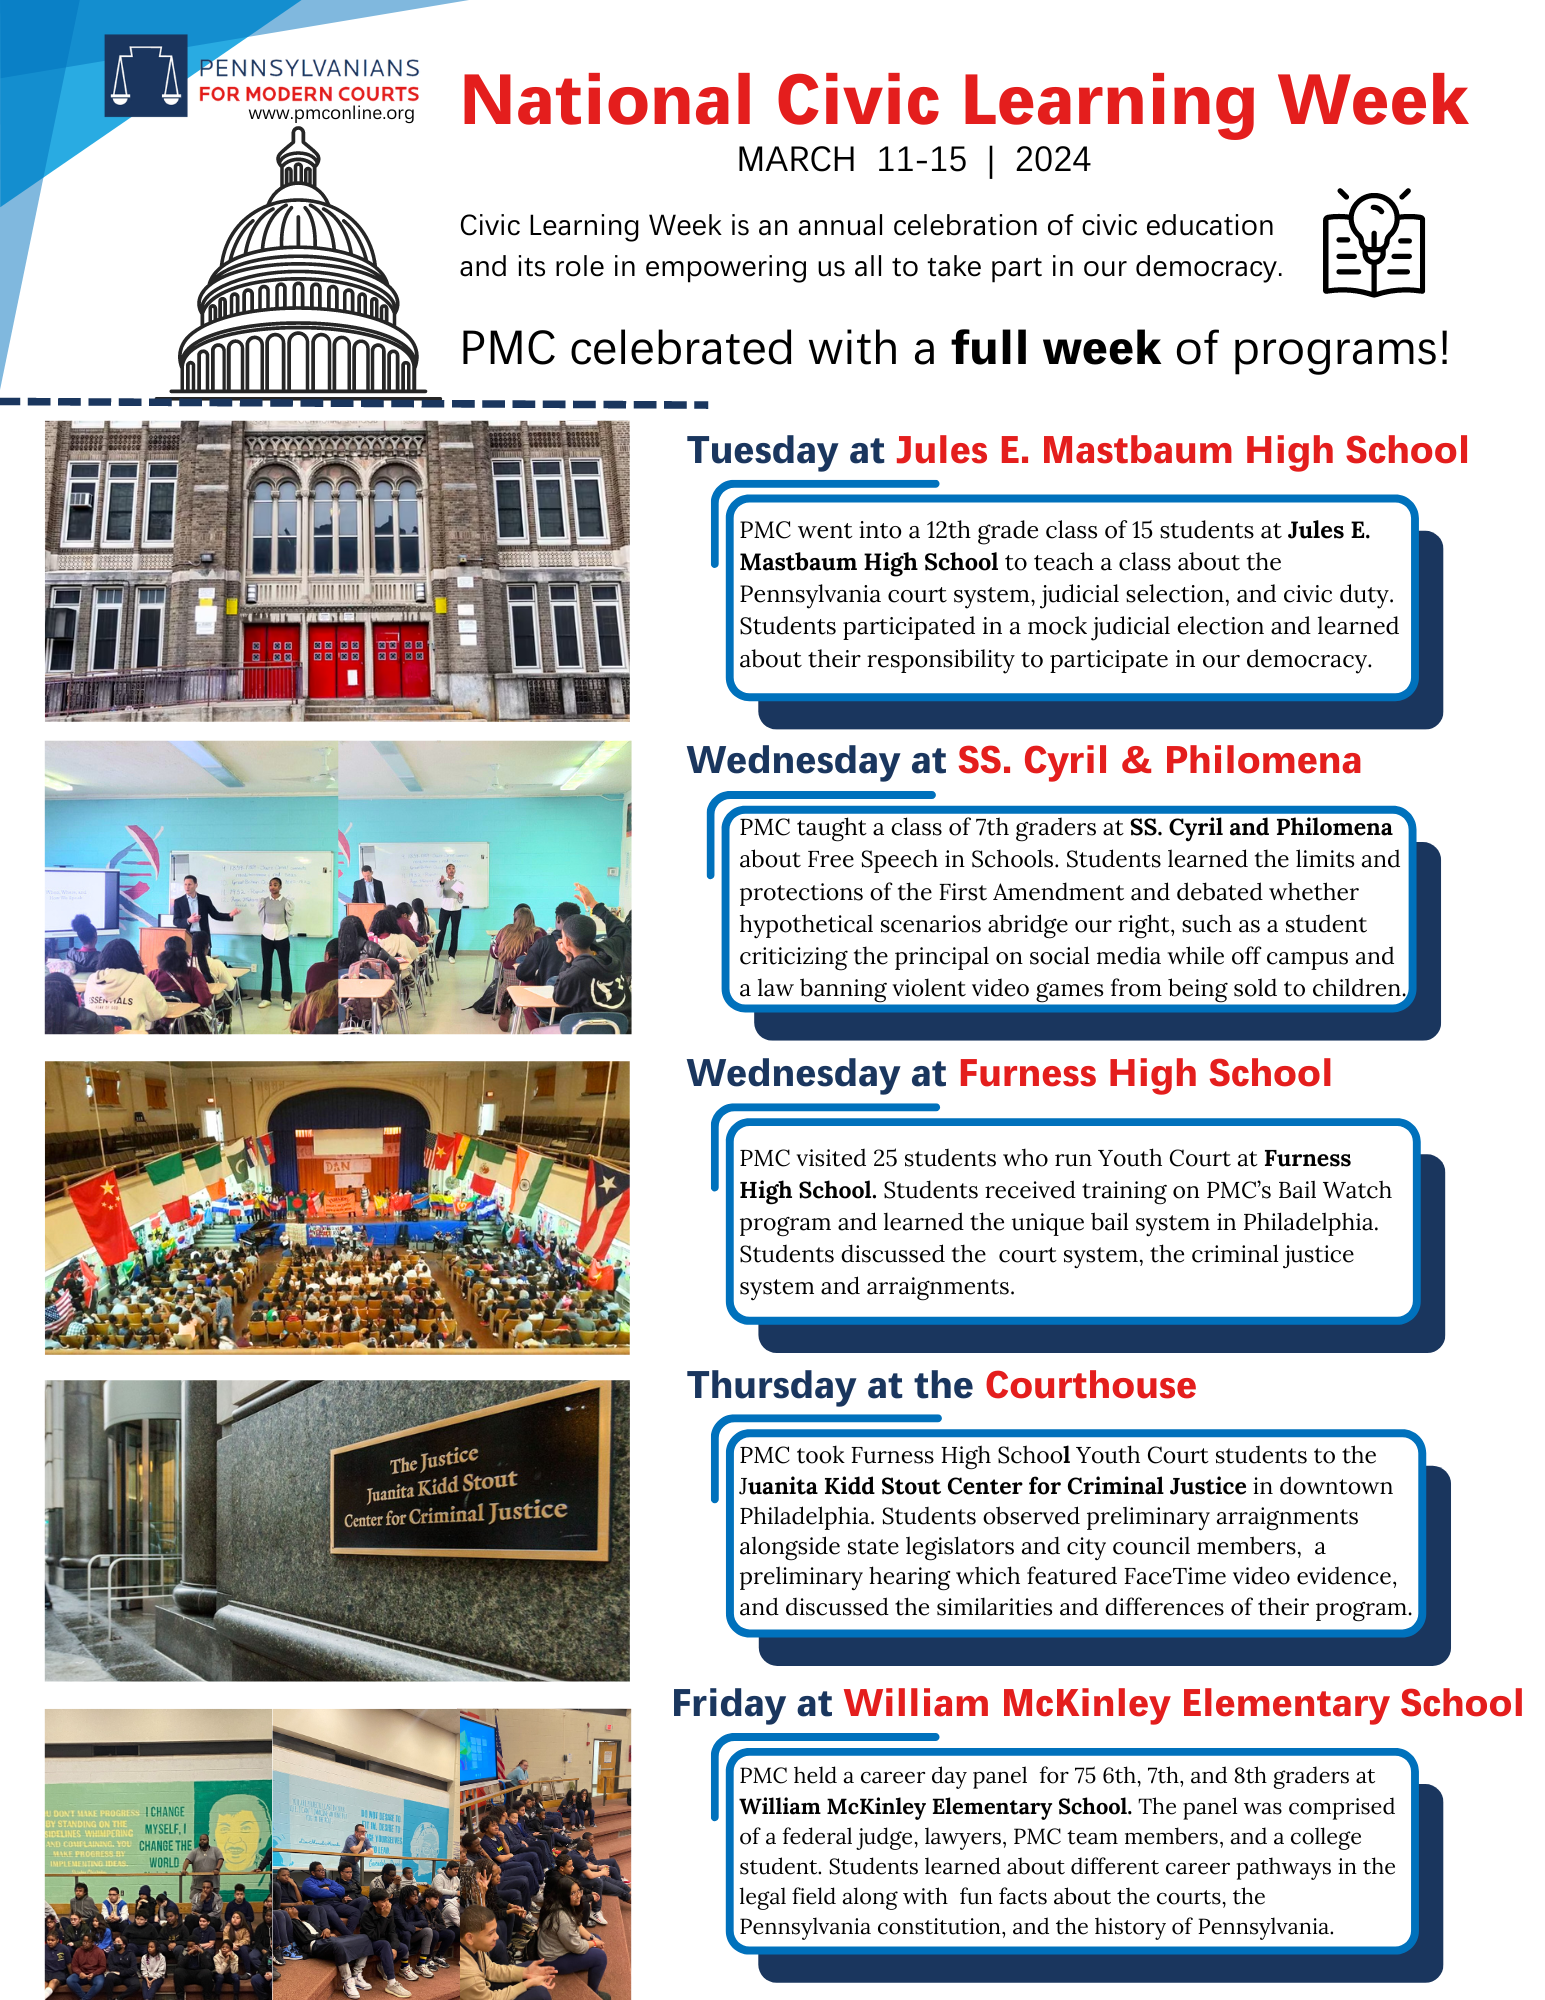 PMC Civic Learning Week Flyer